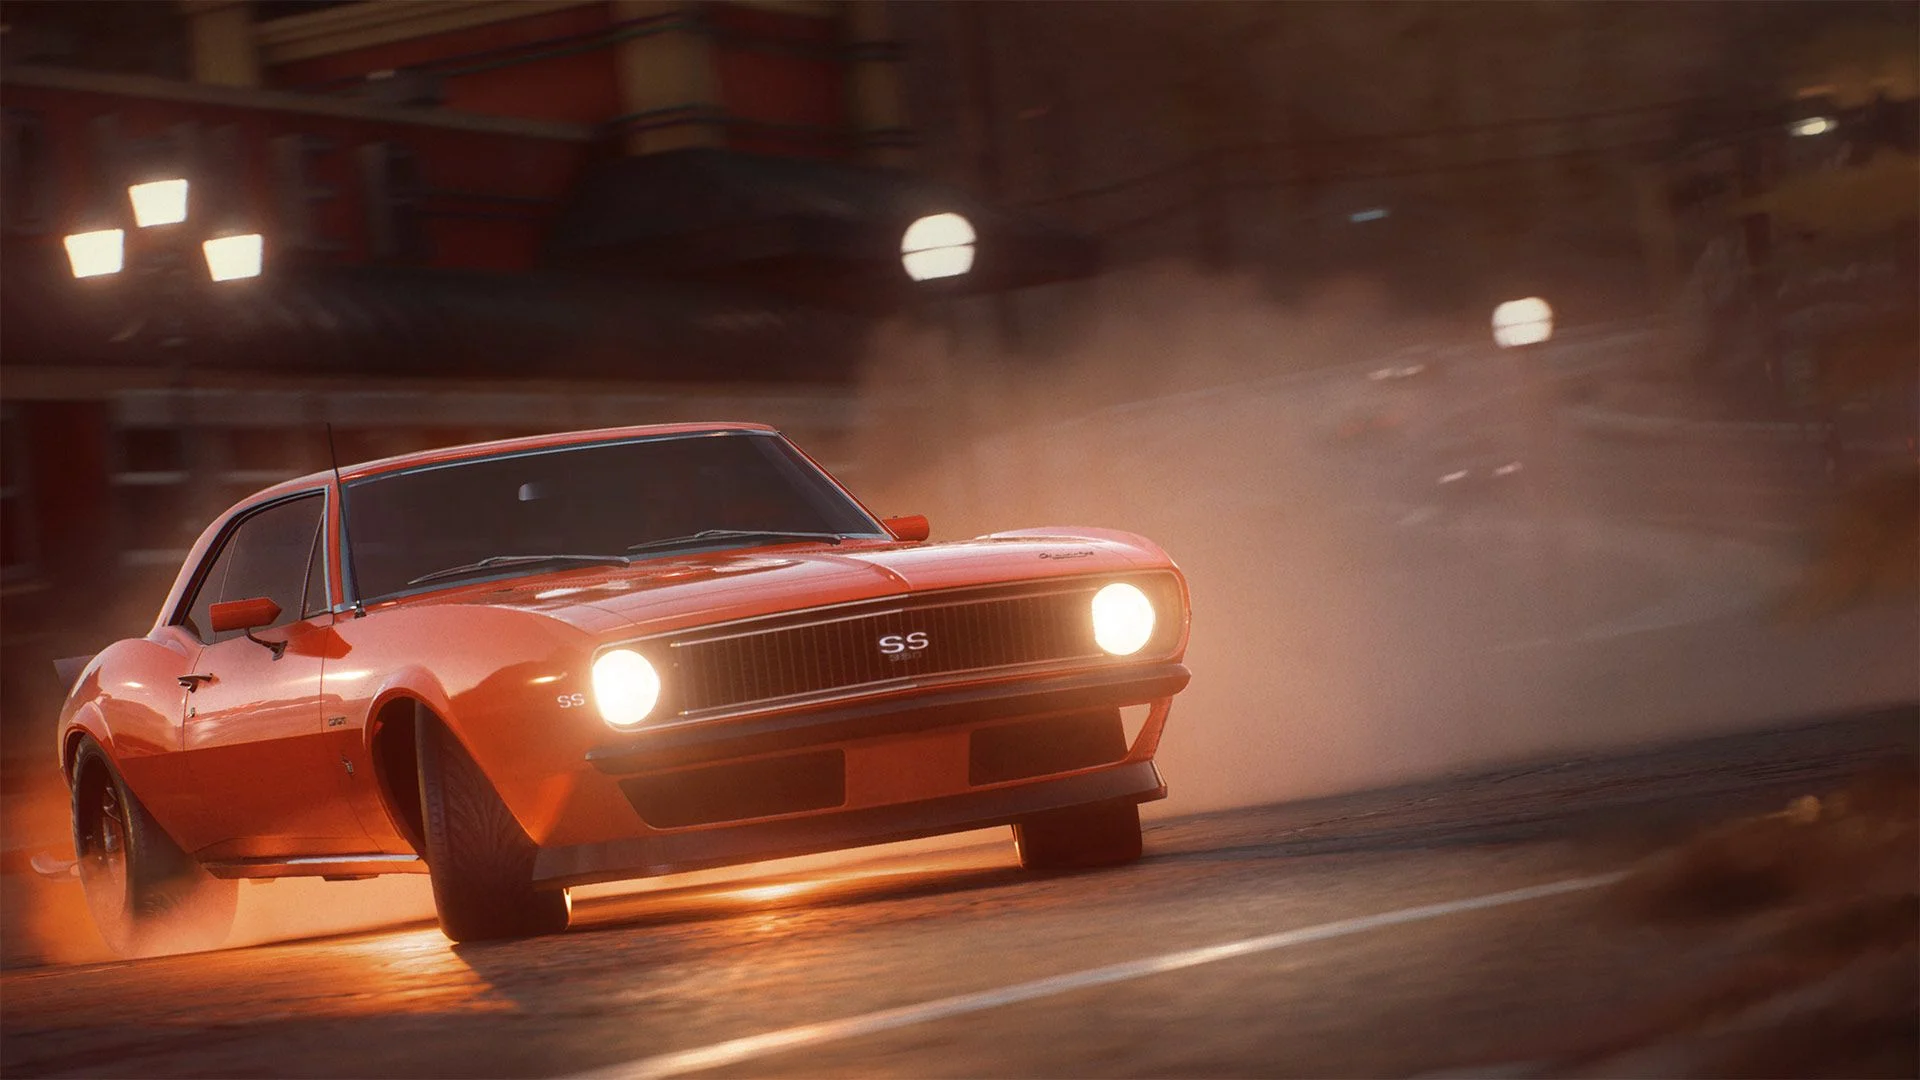 It is likely that a new part of Need for Speed ​​is in development